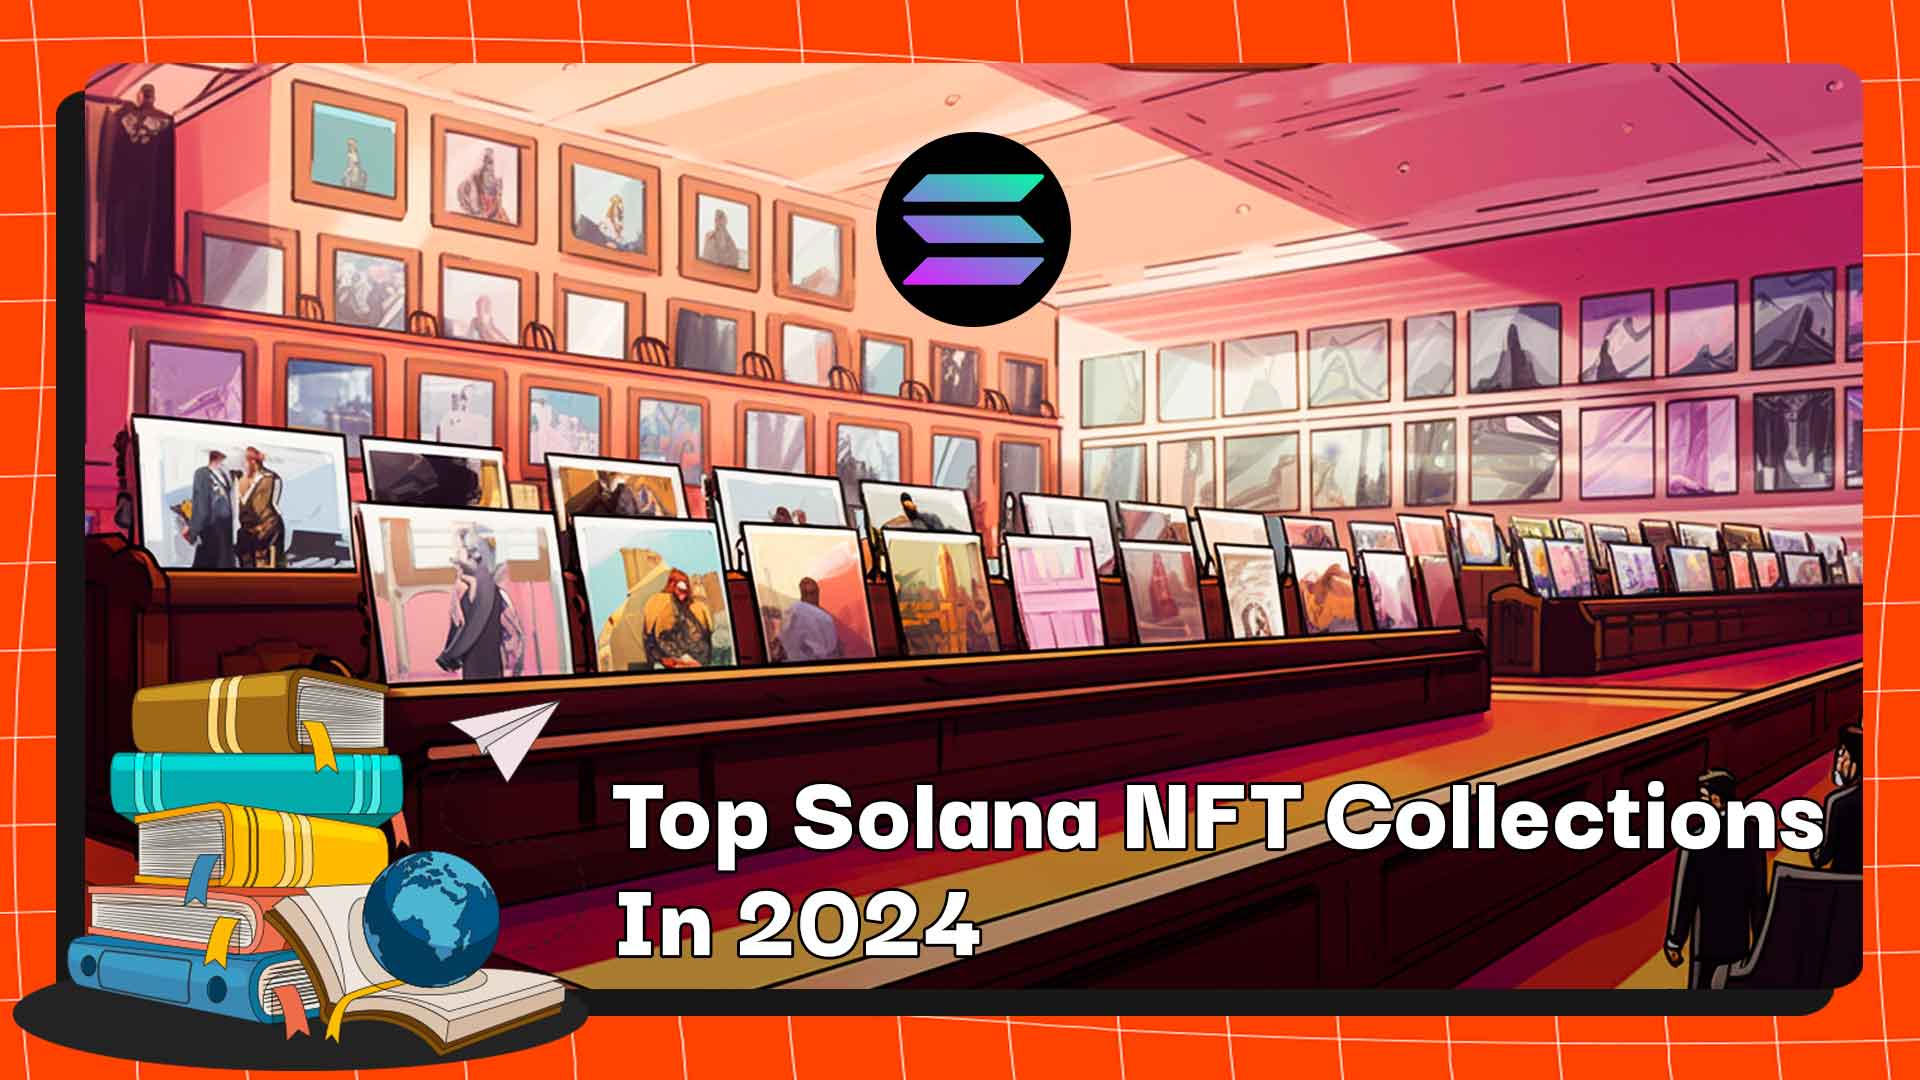 Top Solana NFT Collections In 2024